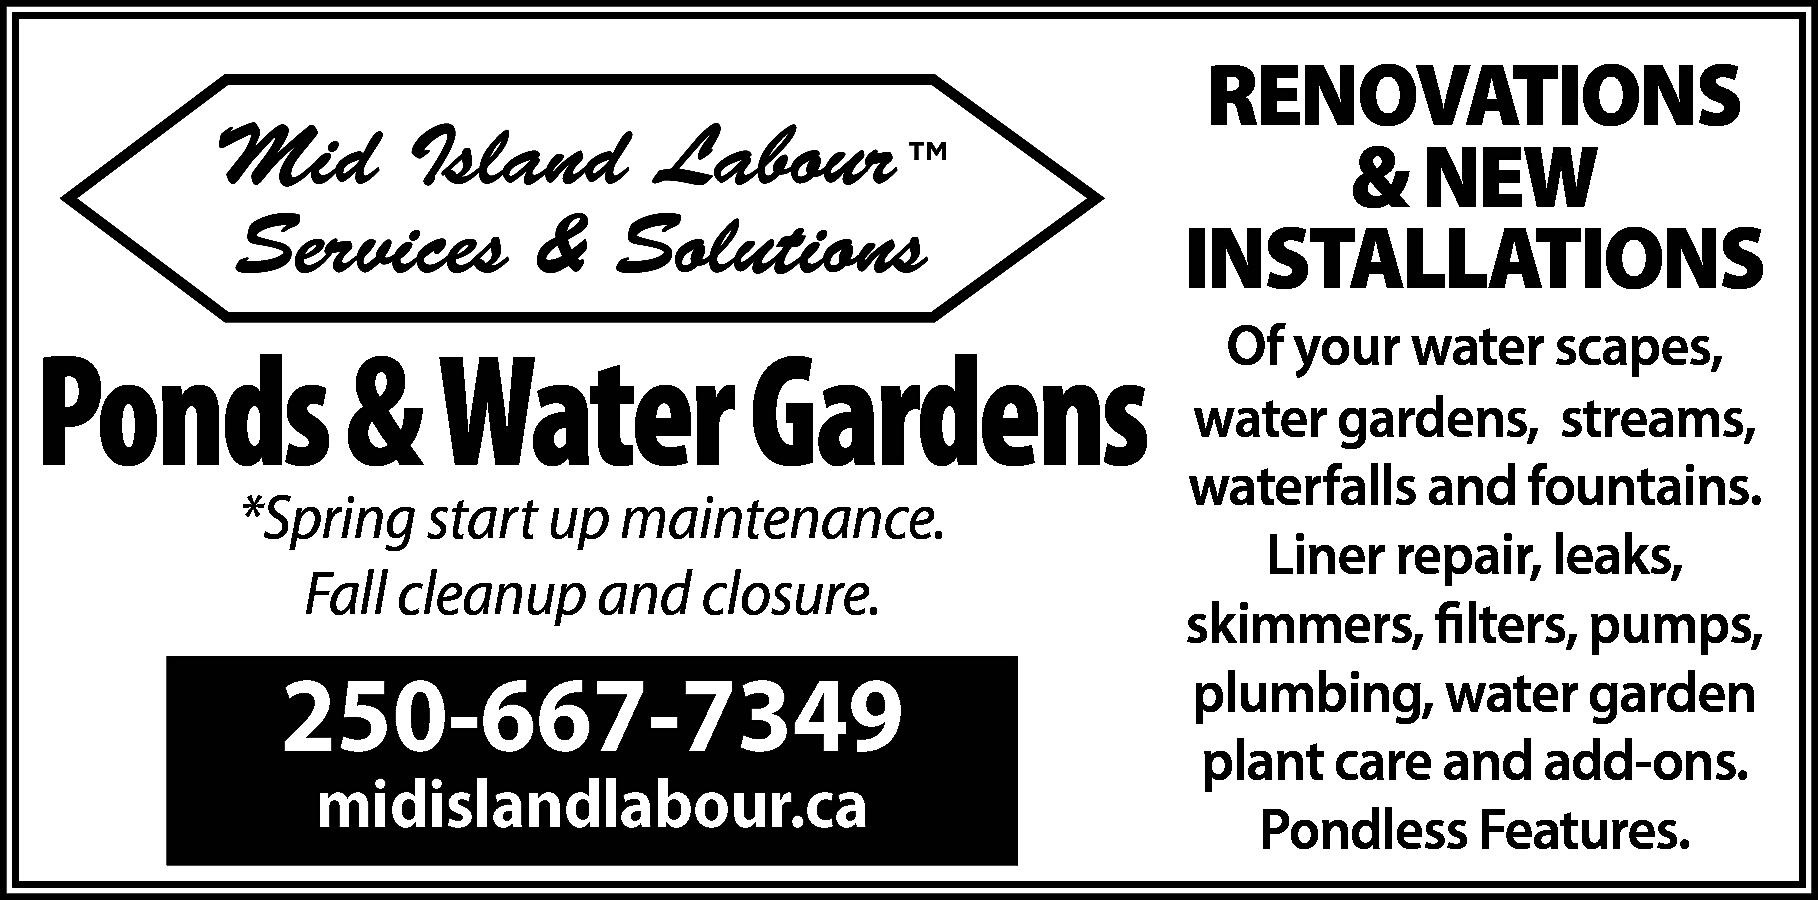 Mid Island Labour <br>Services &  Mid Island Labour  Services & Solutions    Ponds & Water Gardens  *Spring start up maintenance.  Fall cleanup and closure.    250-667-7349  midislandlabour.ca    RENOVATIONS  & NEW  INSTALLATIONS  Of your water scapes,  water gardens, streams,  waterfalls and fountains.  Liner repair, leaks,  skimmers, filters, pumps,  plumbing, water garden  plant care and add-ons.  Pondless Features.    